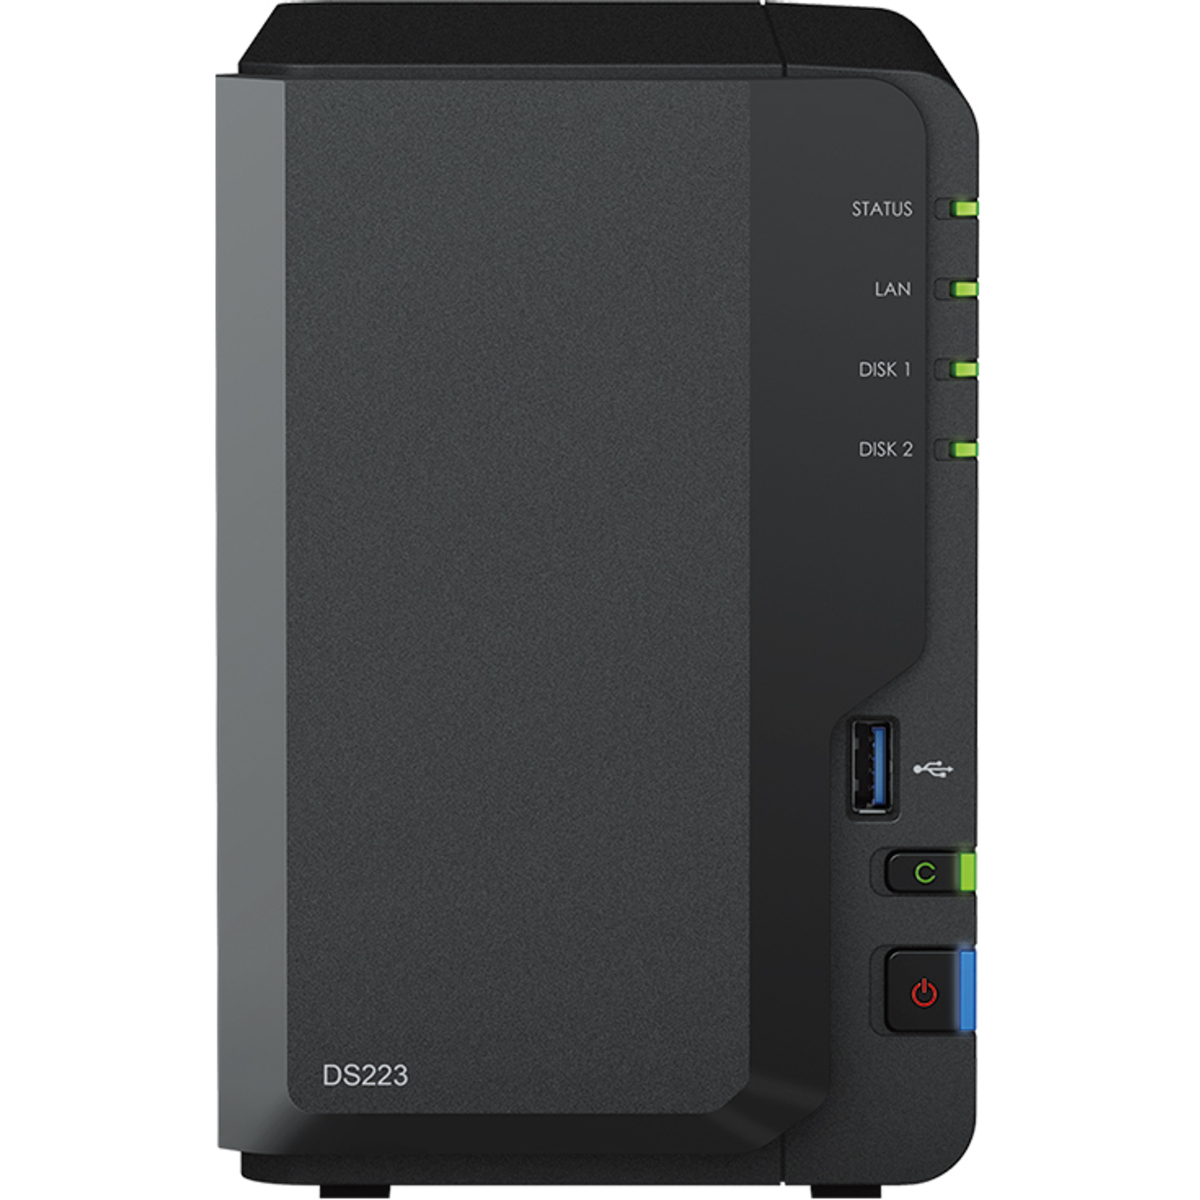 Synology DiskStation DS223 4tb 2-Bay Desktop Personal / Basic Home / Small Office NAS - Network Attached Storage Device 2x2tb Seagate IronWolf Pro ST2000NT001 3.5 7200rpm SATA 6Gb/s HDD NAS Class Drives Installed - Burn-In Tested DiskStation DS223